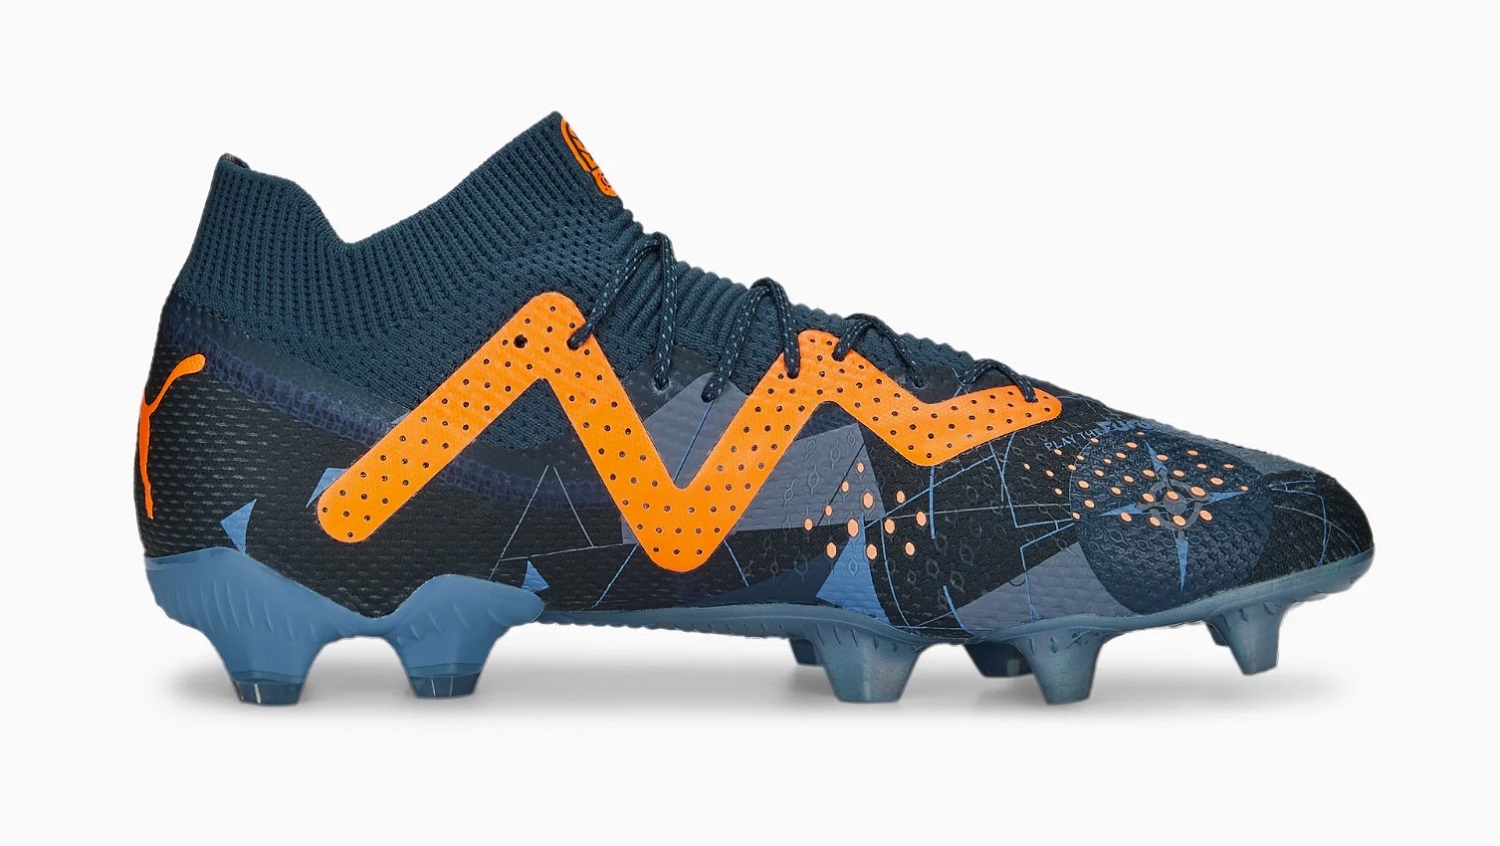 Puma FUTURE Ultimate DNA Released - Soccer Cleats 101